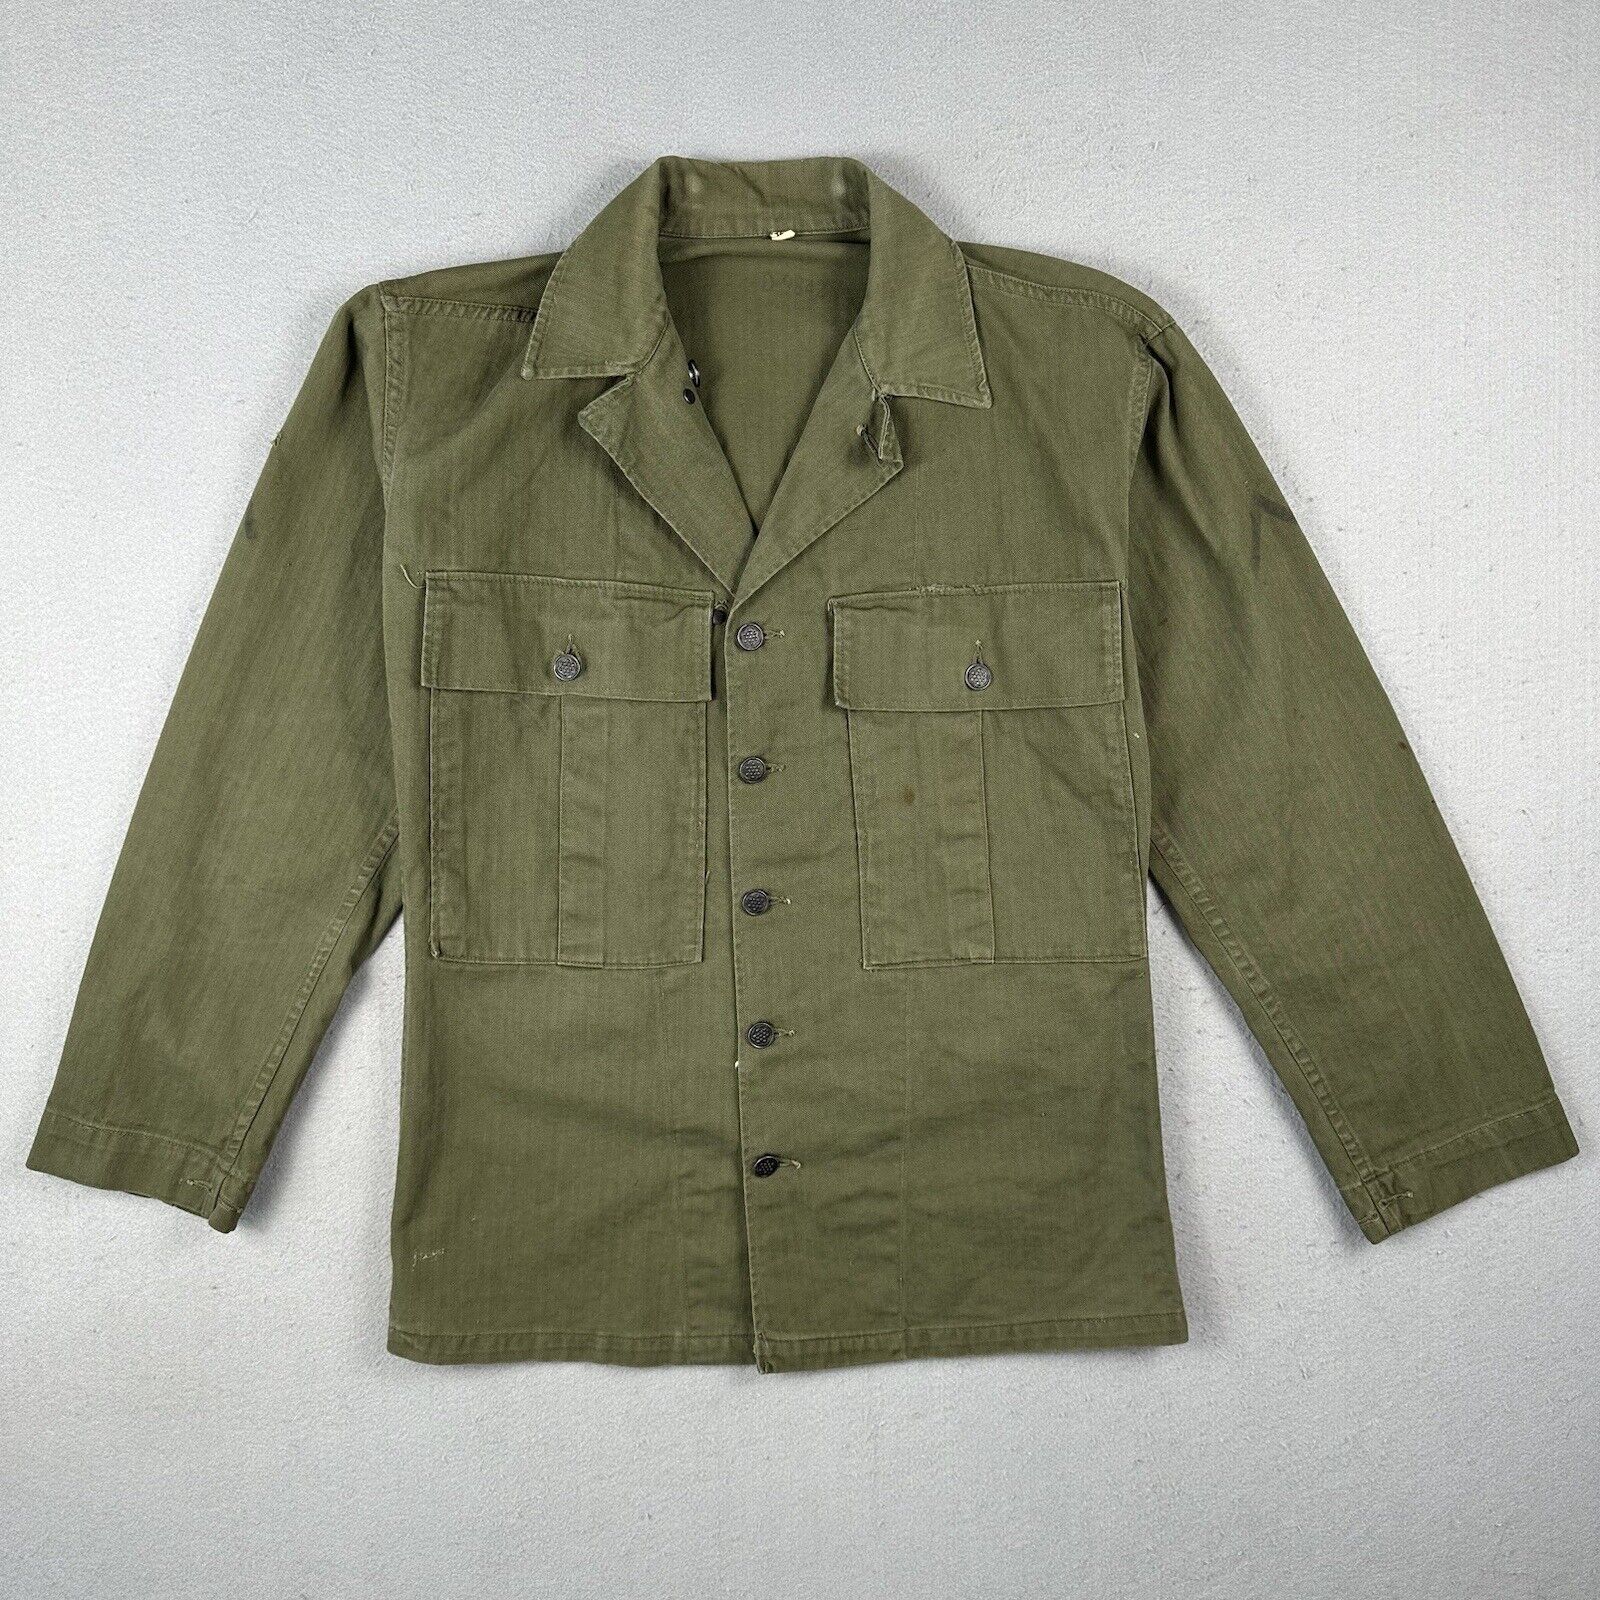 WW2 US Army HBT Jacket Shirt 13 Star 2nd Pattern Pleated Pockets 36r Private